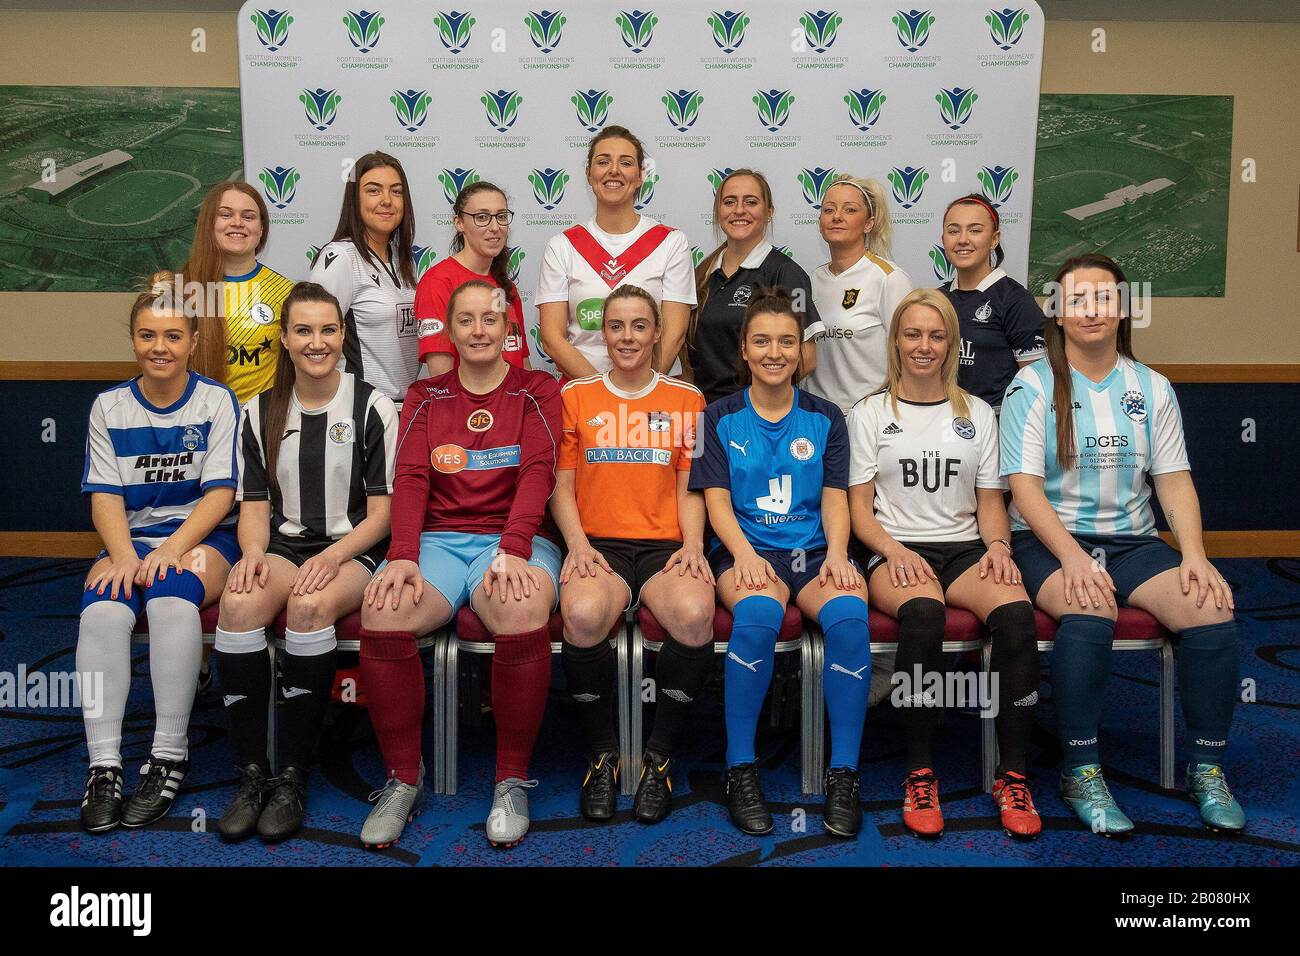 Glasgow, UK. 19th Feb 2020. Representatives form the teams involved in the inaugural season of the Scottish Women's Football Championship gathered during the Scottish Women's Championship Season Launch Event at The National Stadium, Hampden Park, Glasgow, Wednesday 19th February 2020 | Credit Colin Poultney/Alamy Live News Stock Photo